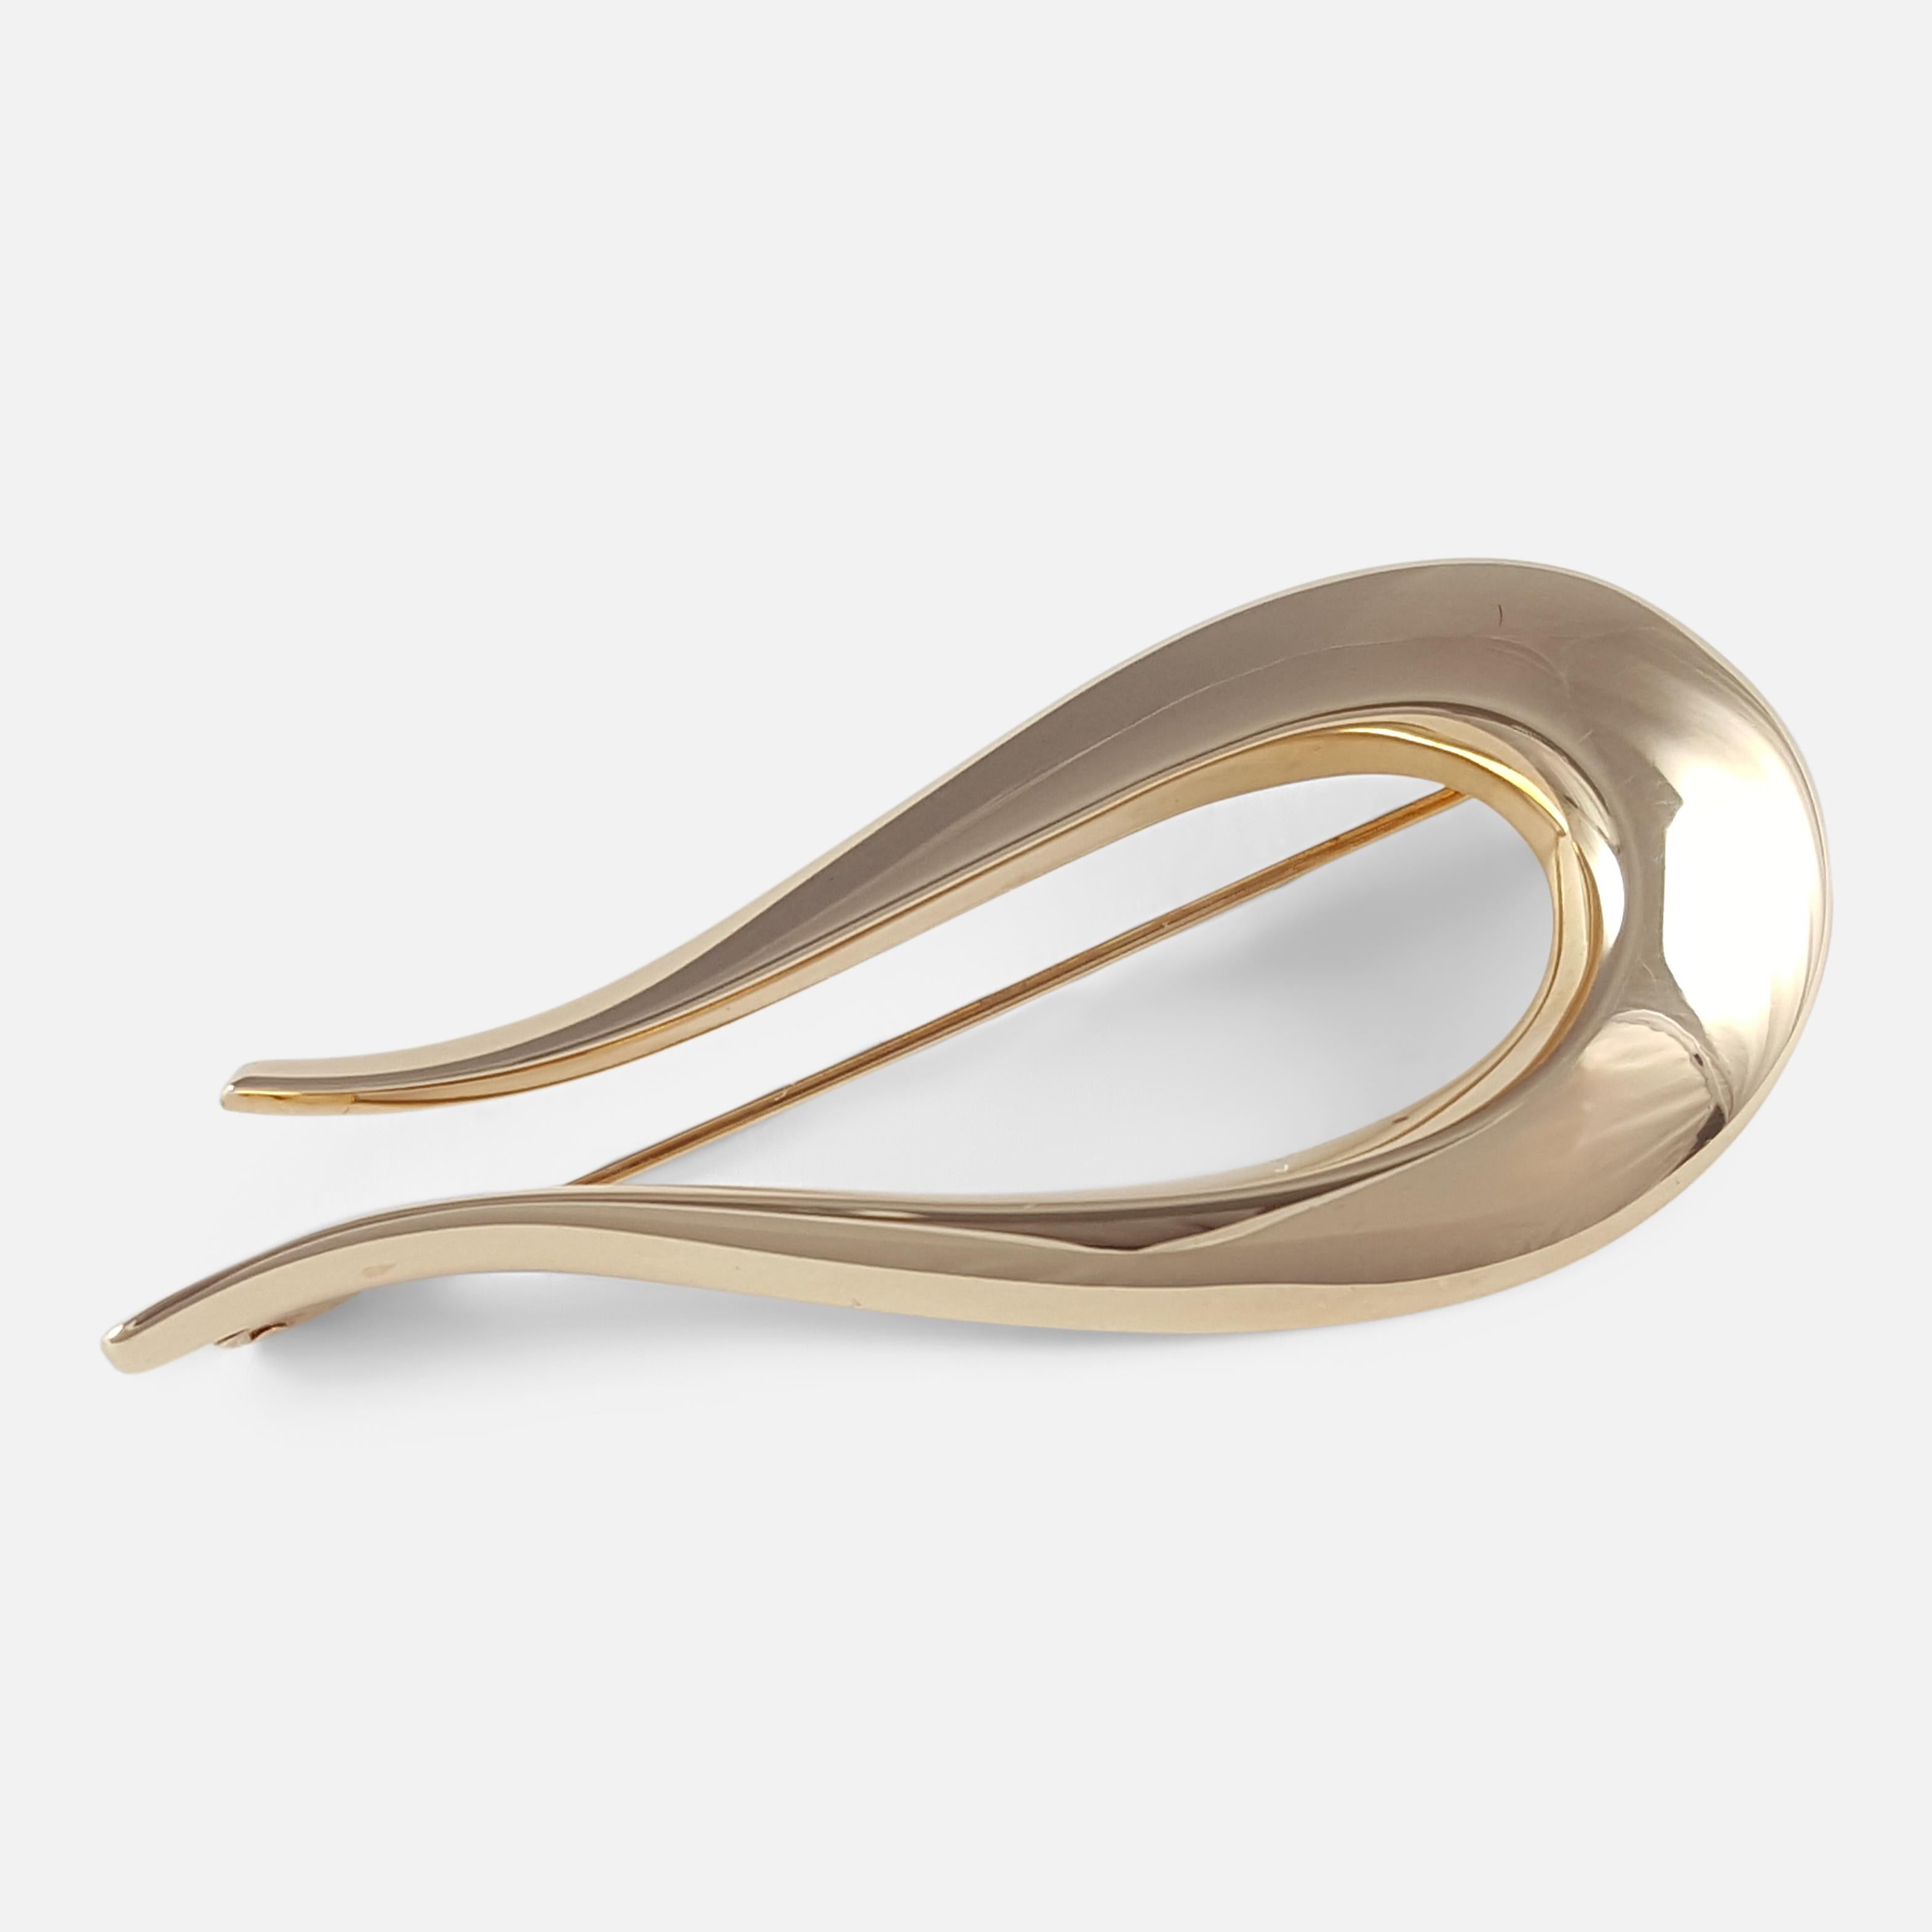 A 14 Karat yellow gold brooch, by Hans Hansen. 

The brooch is stamped 'Hans Hansen', '585', '104', & 'Denmark'. The brooch is UK hallmarked, stamped '585' to denote 14 karat (carat) gold.

Engraving: - None.

Measurement: - The brooch measures